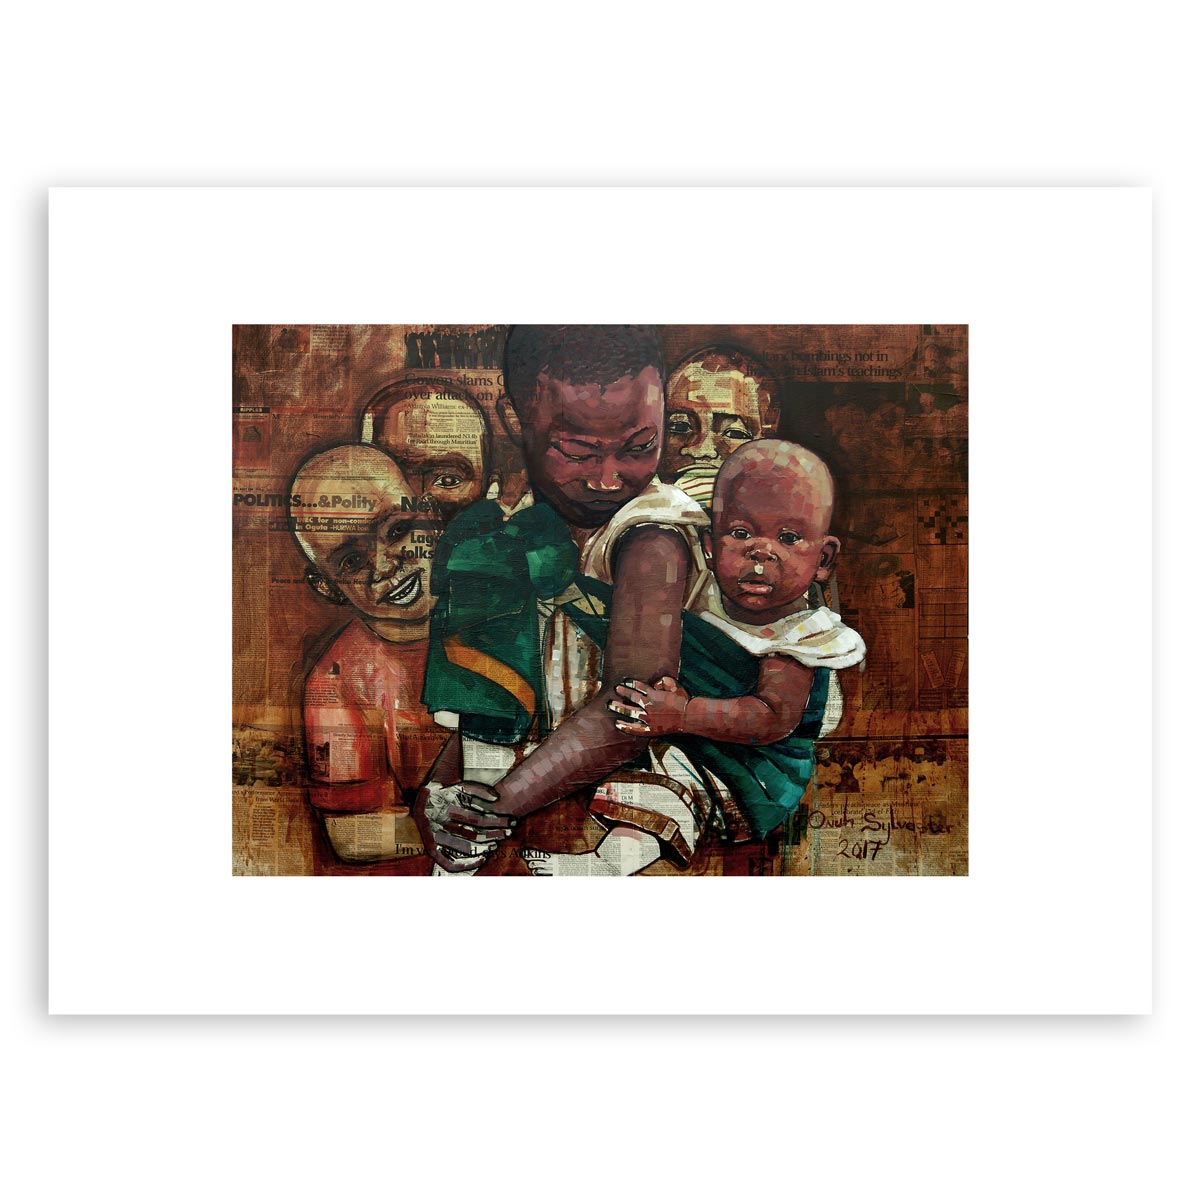 Eyes of a Child (Unaware) – art print